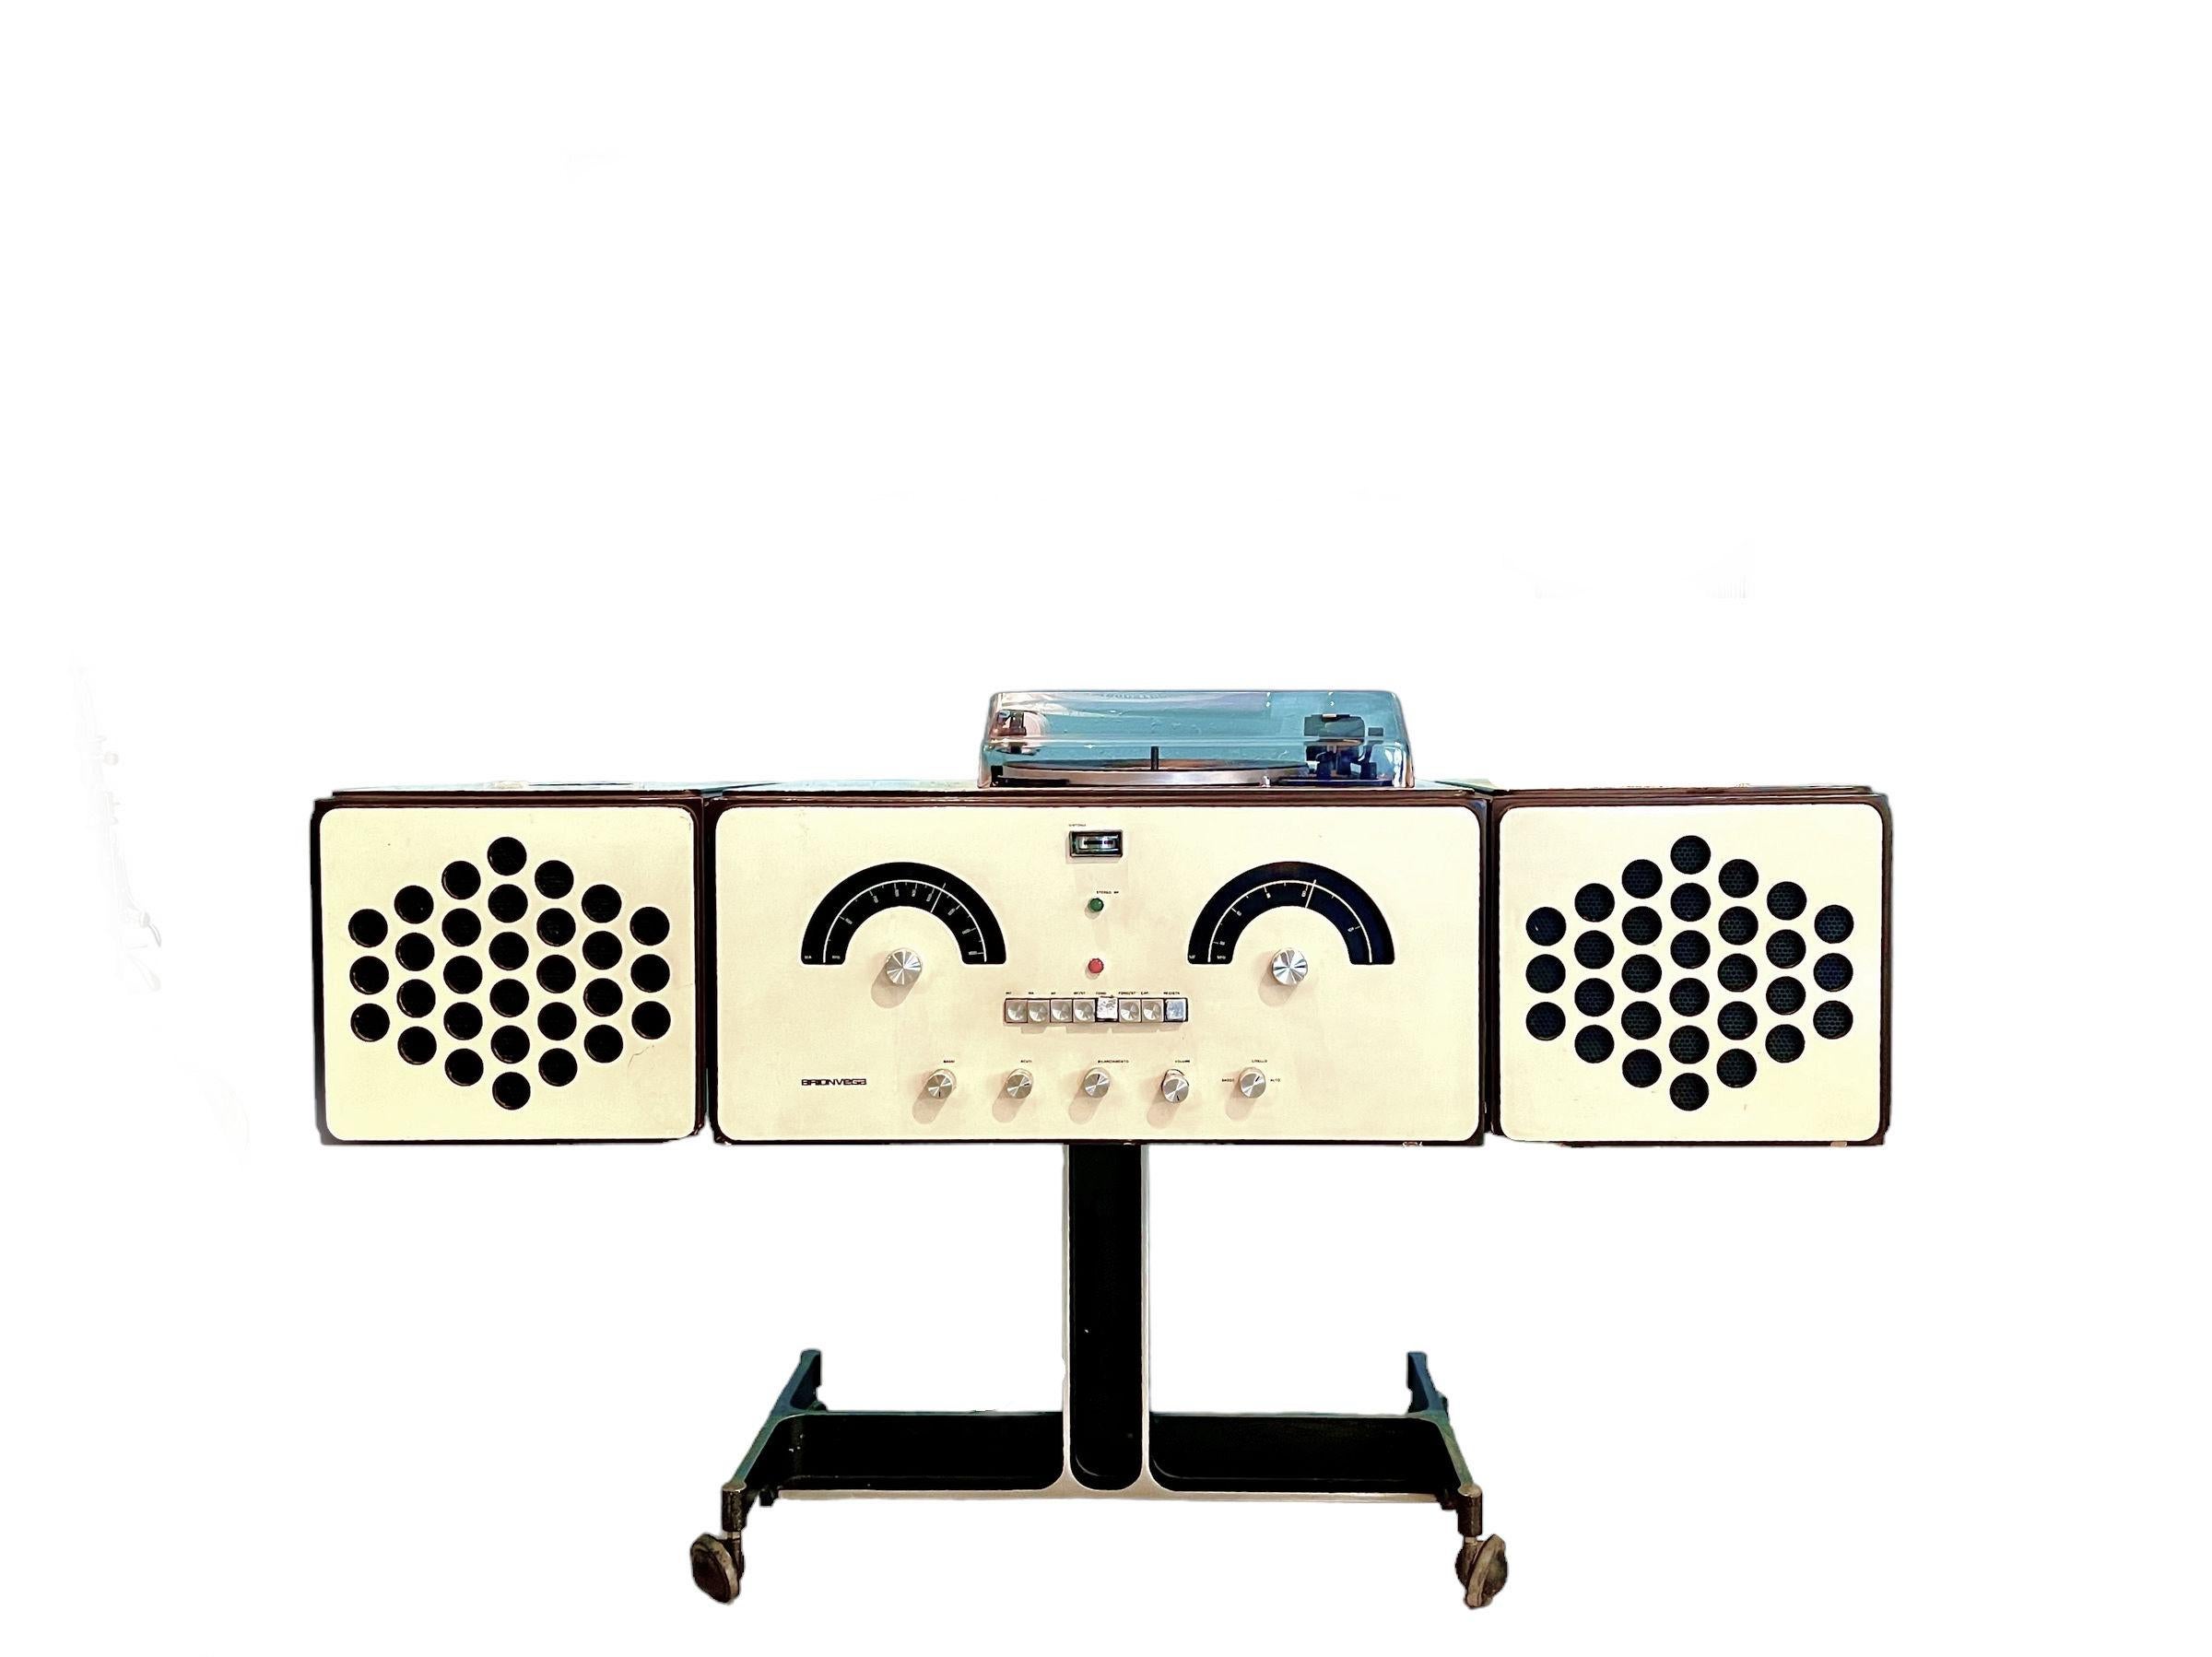 Thanks for looking at this refurbished, fully functioning mid-century stereo console.
Designed in 1965 by international legends Achille and Pier Giacomo Castiglioni, the rr-126 is an iconic work of modern Industrial Design. Handcrafted in Italy